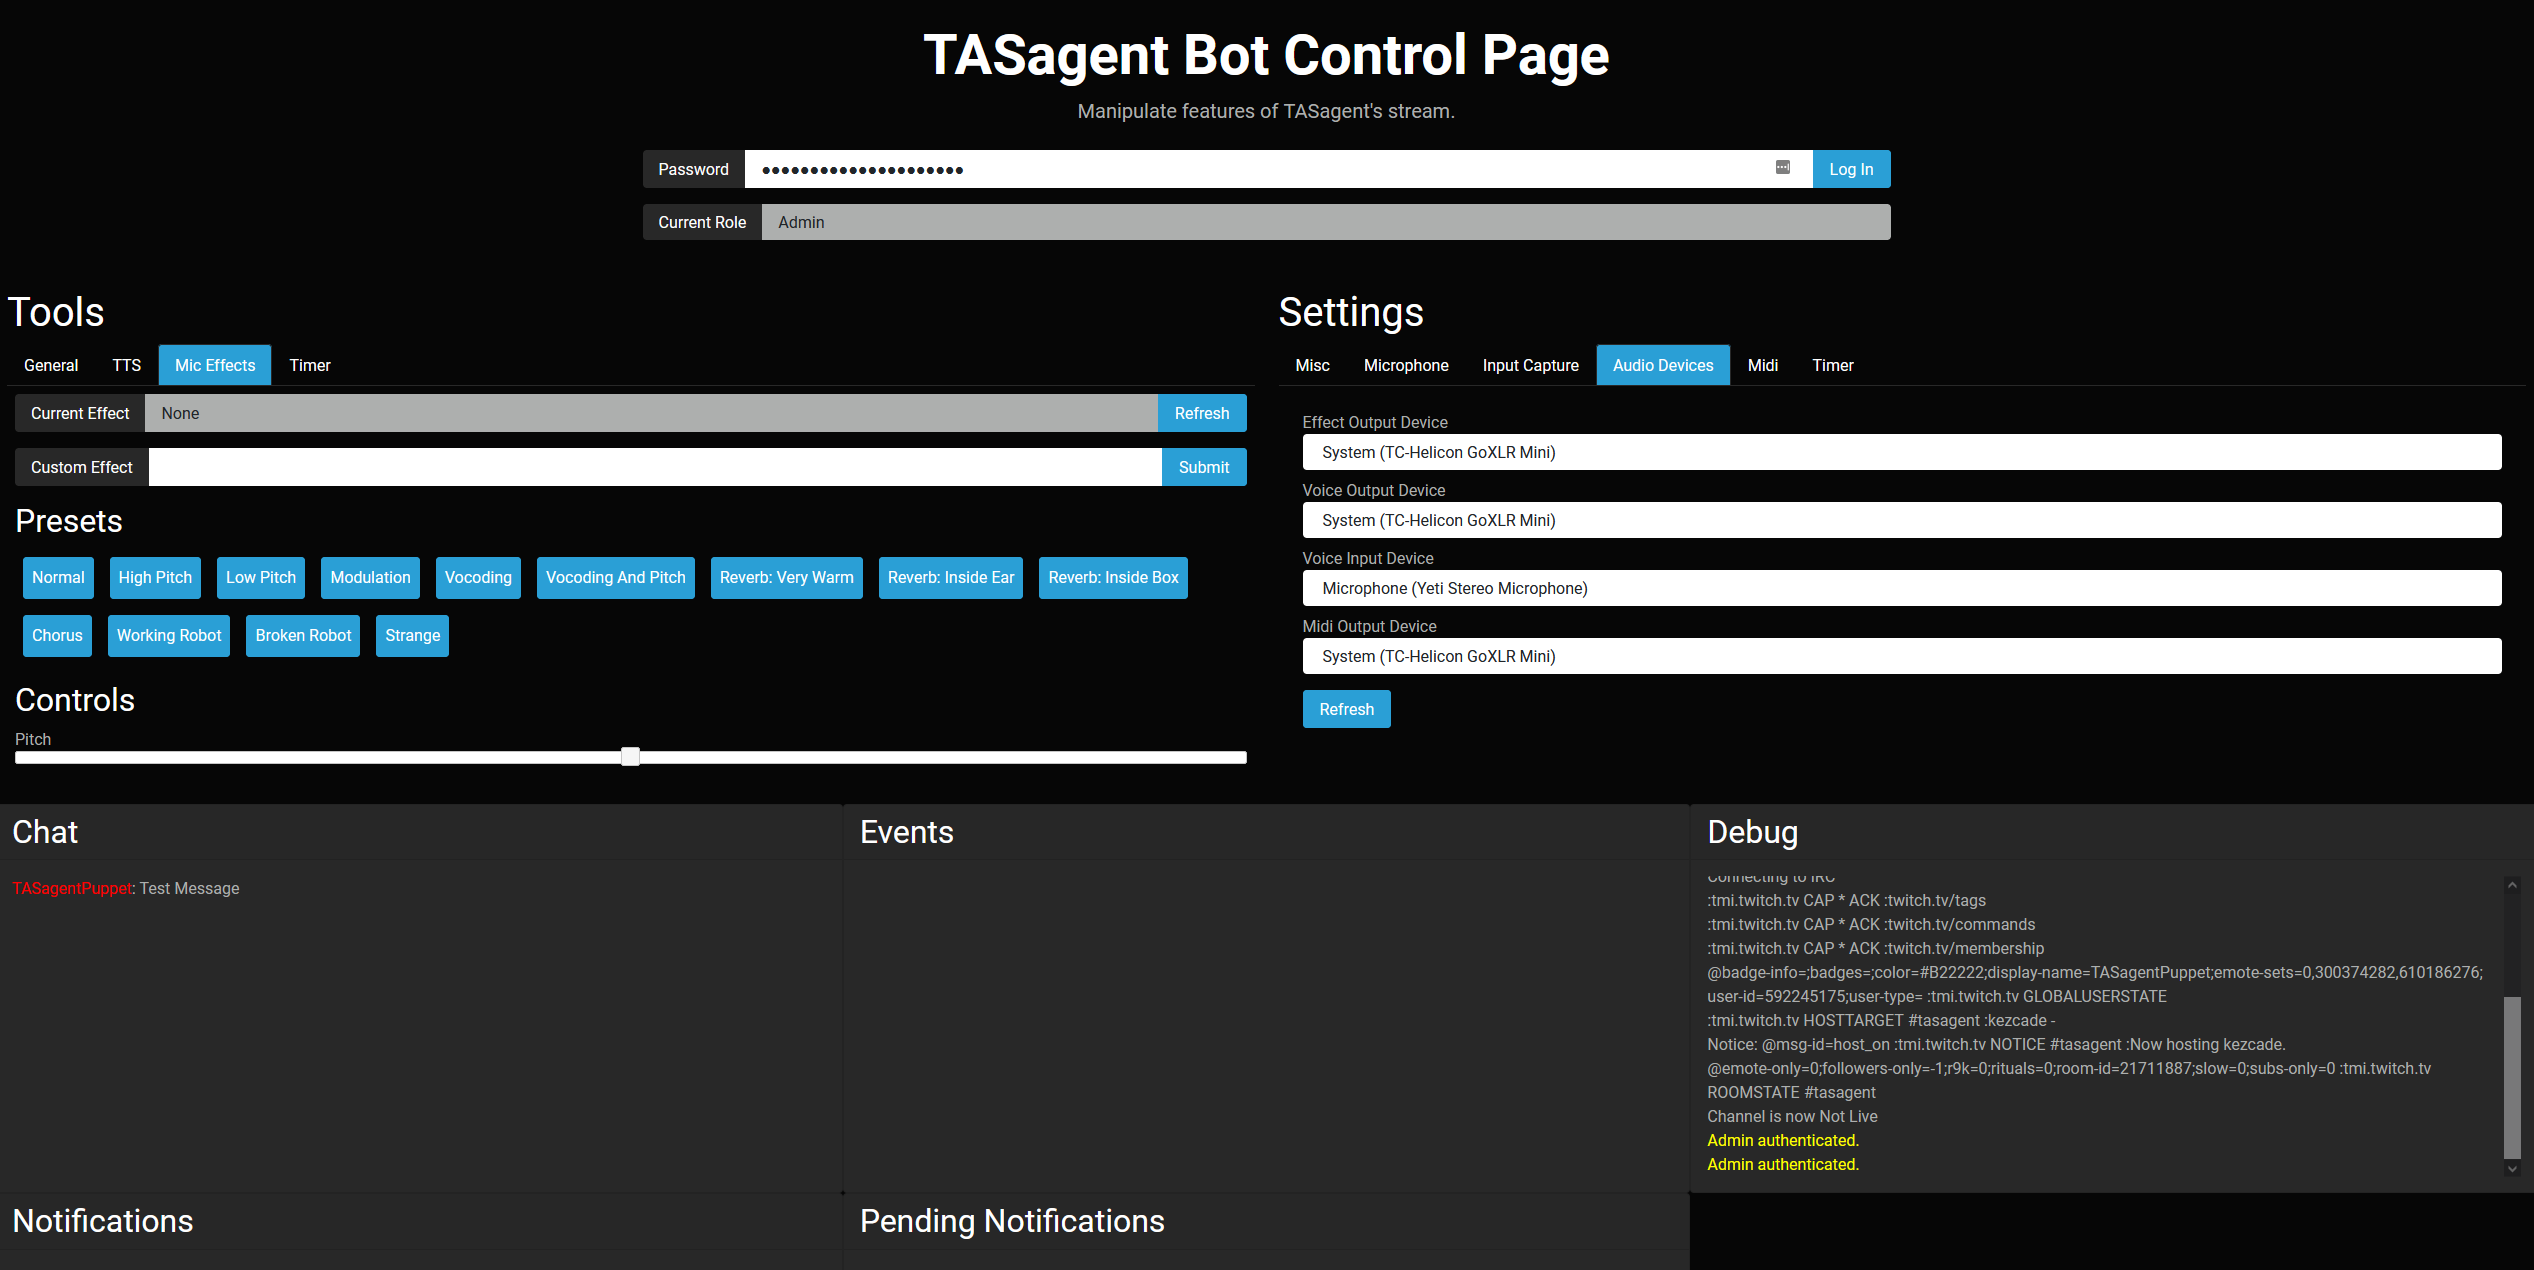 Control Page